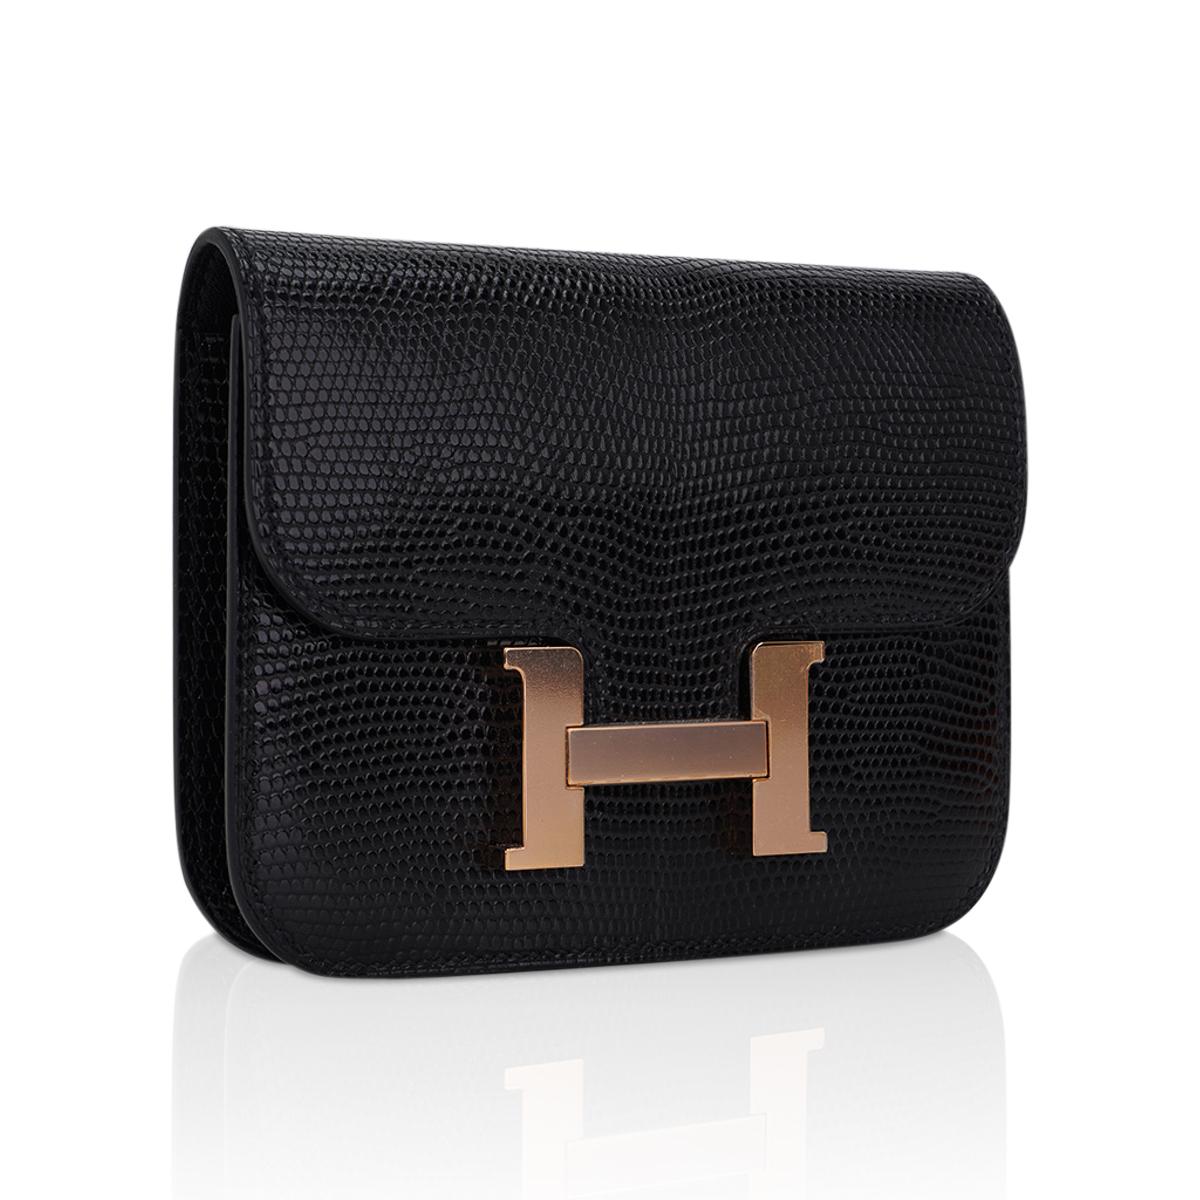 Mightychic offers an Hermes Constance Slim Wallet Belt bag featured in Black Lizard.
This Hermes wallet is stunning with accentuated Rose Gold hardware.
The wallet includes a removable zipped change purse and has two (2) credit card slots.
Rear belt